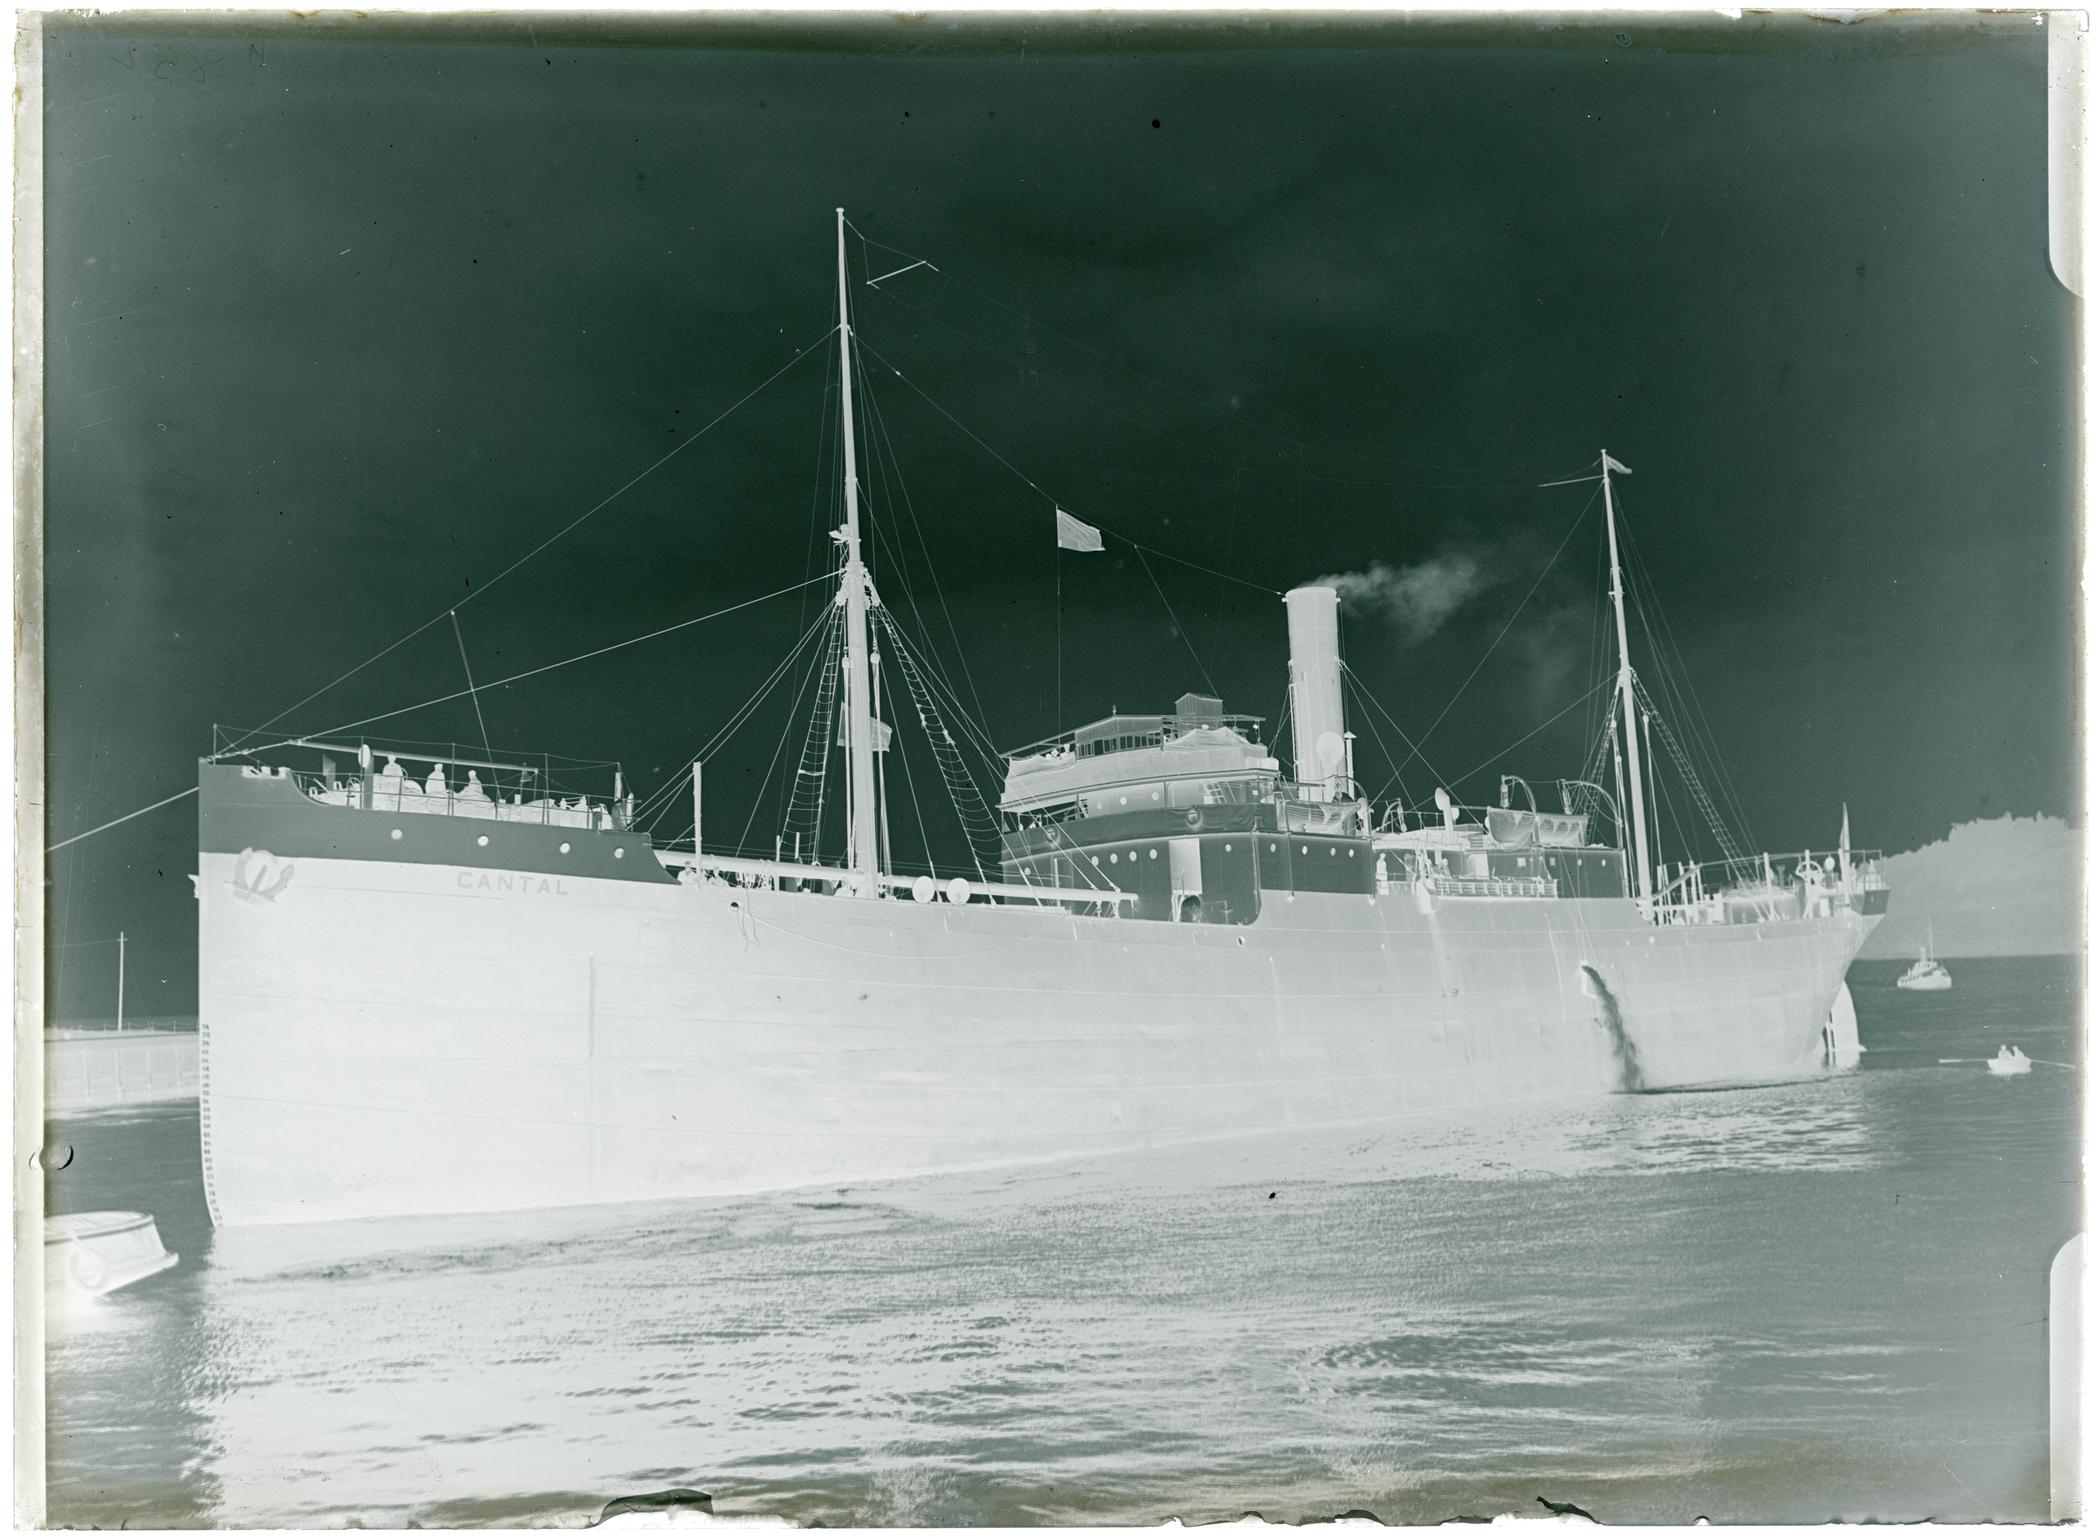 S.S. CANTAL, glass negative